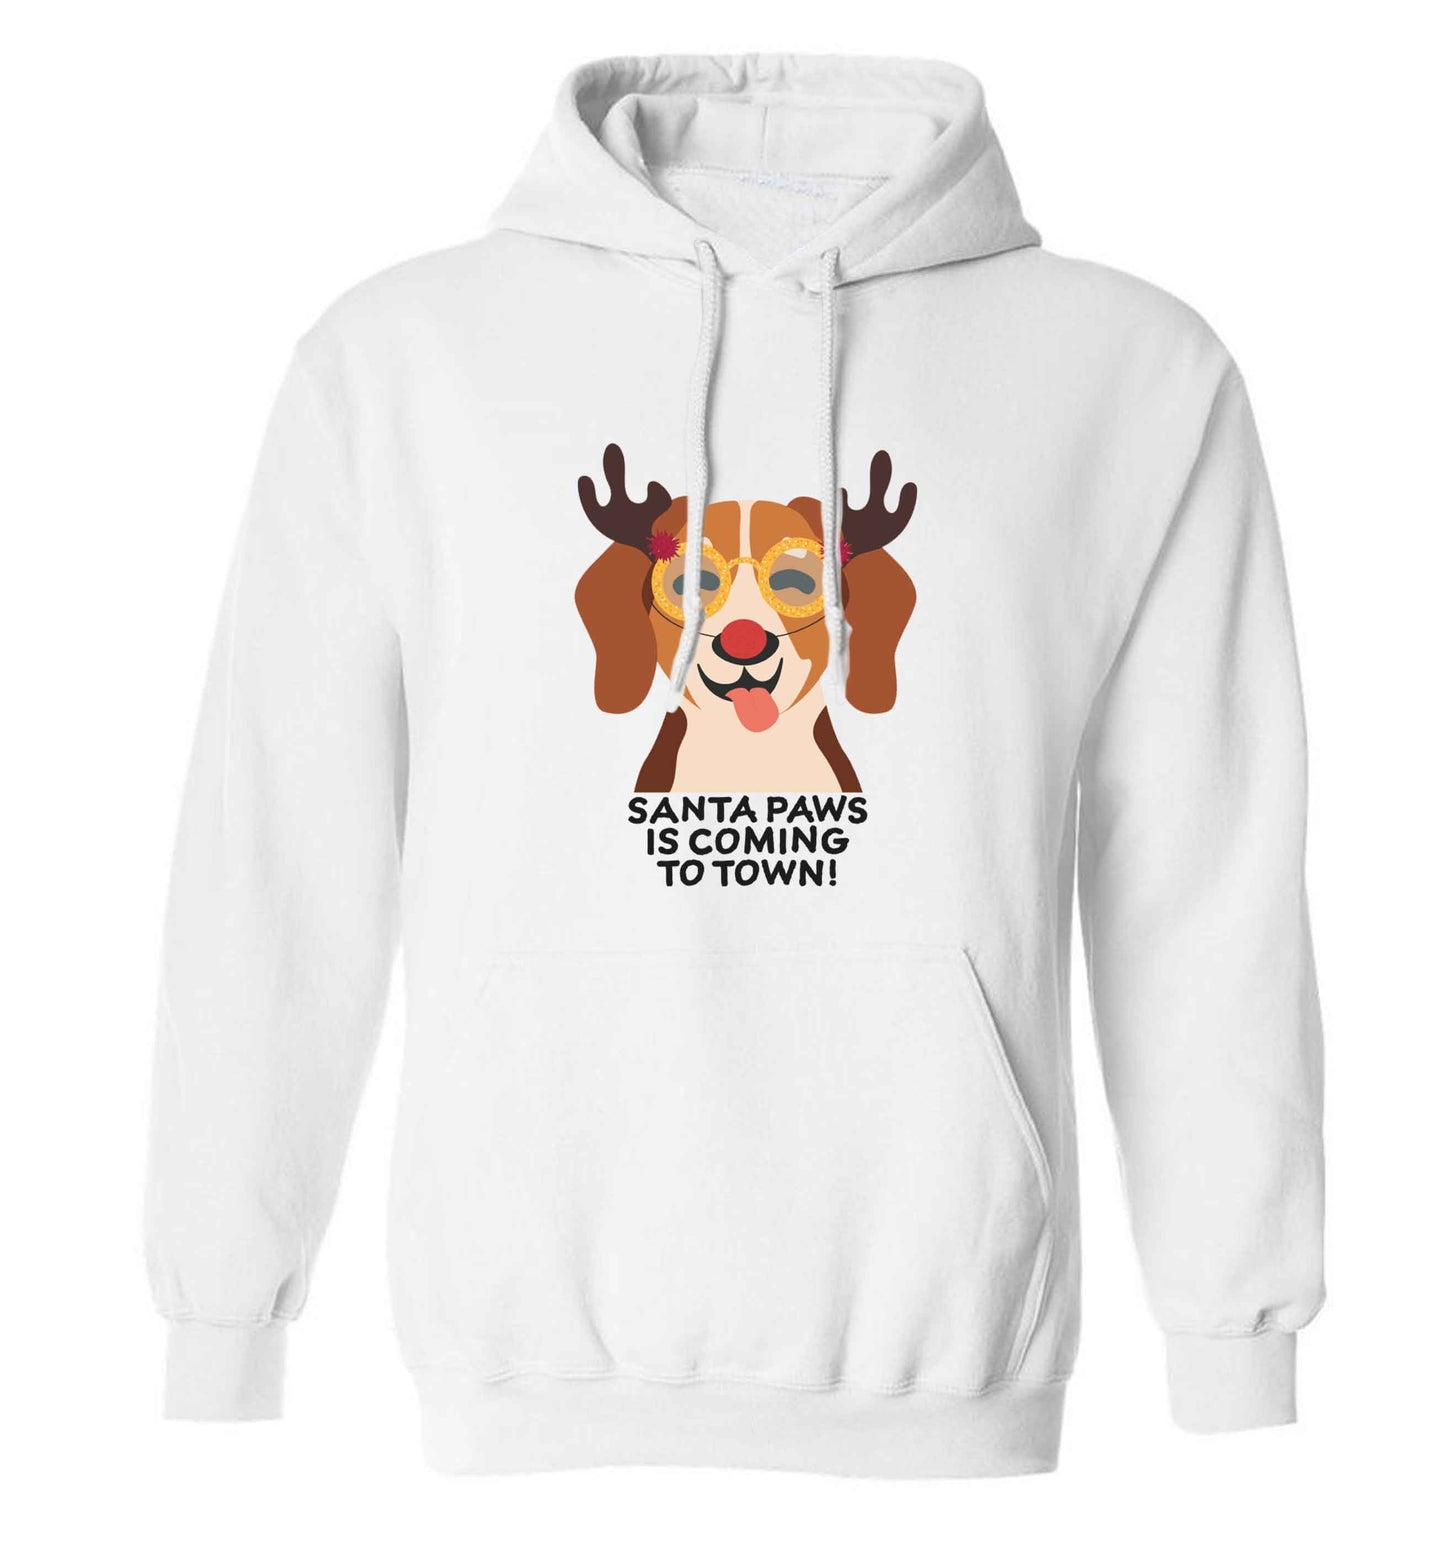 Santa paws is coming to town adults unisex white hoodie 2XL